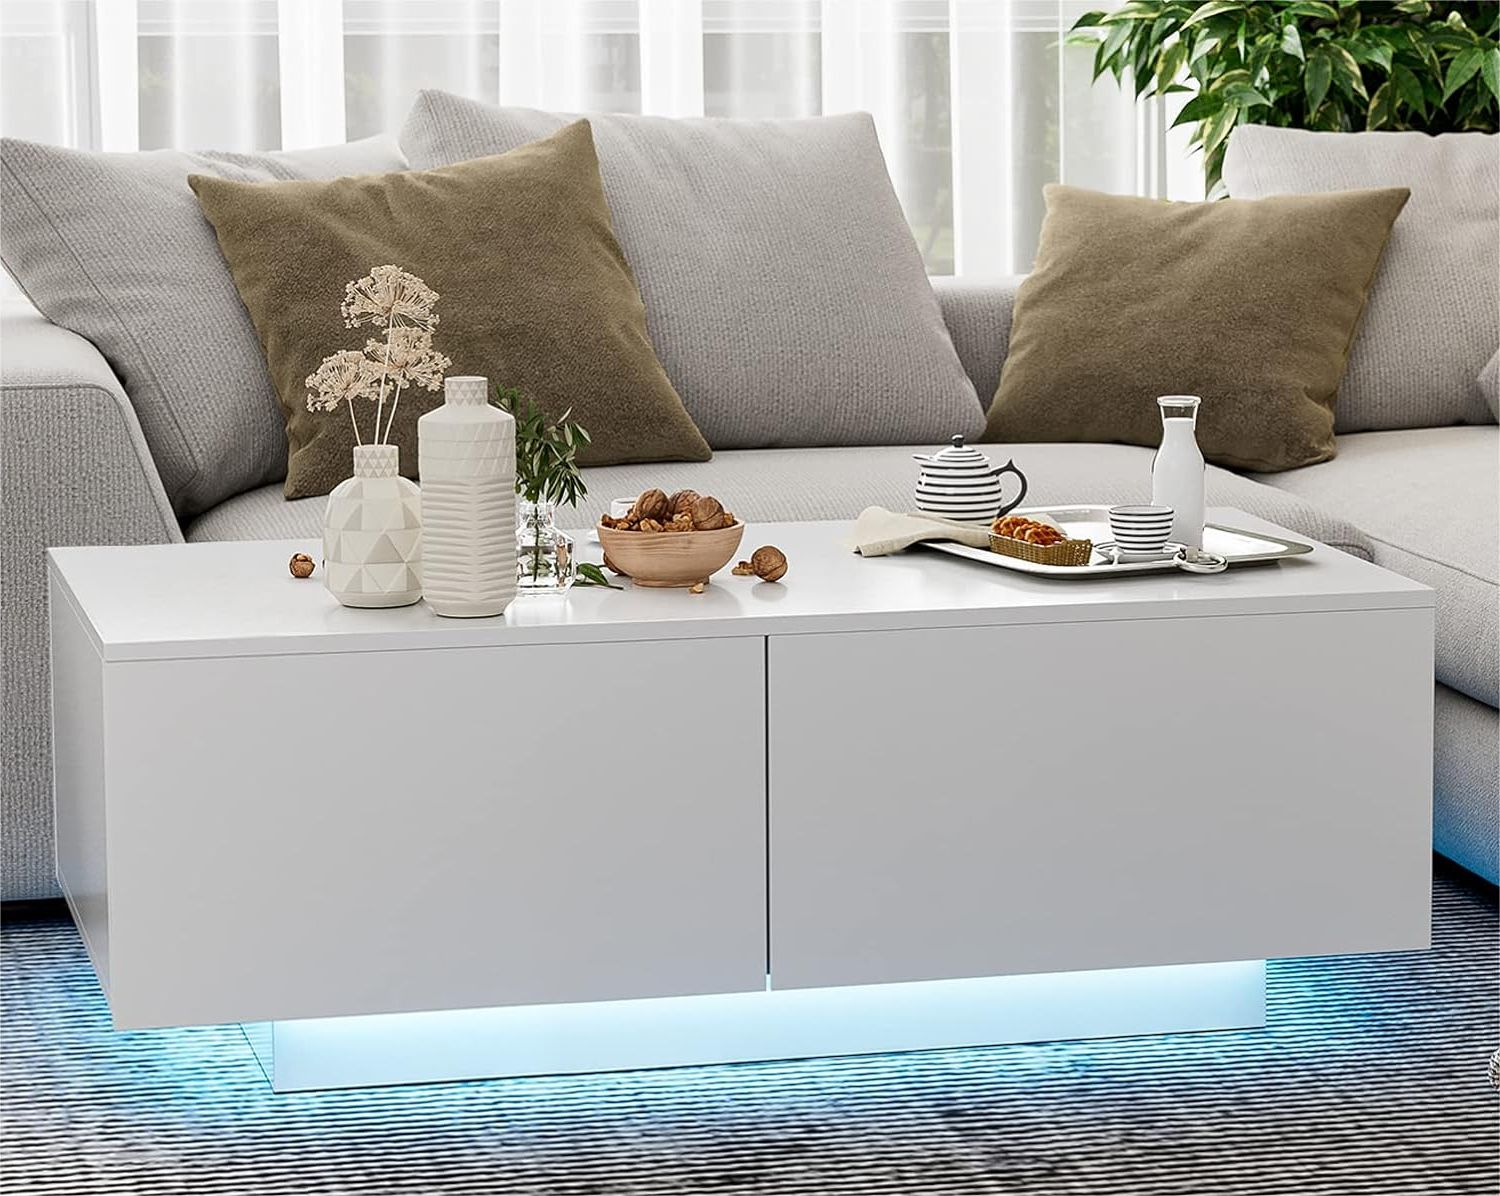 Most Recent Amazon: Ikifly Modern Led Coffee Table With 4 Drawers, Large High Throughout Led Coffee Tables With 4 Drawers (Photo 1 of 15)